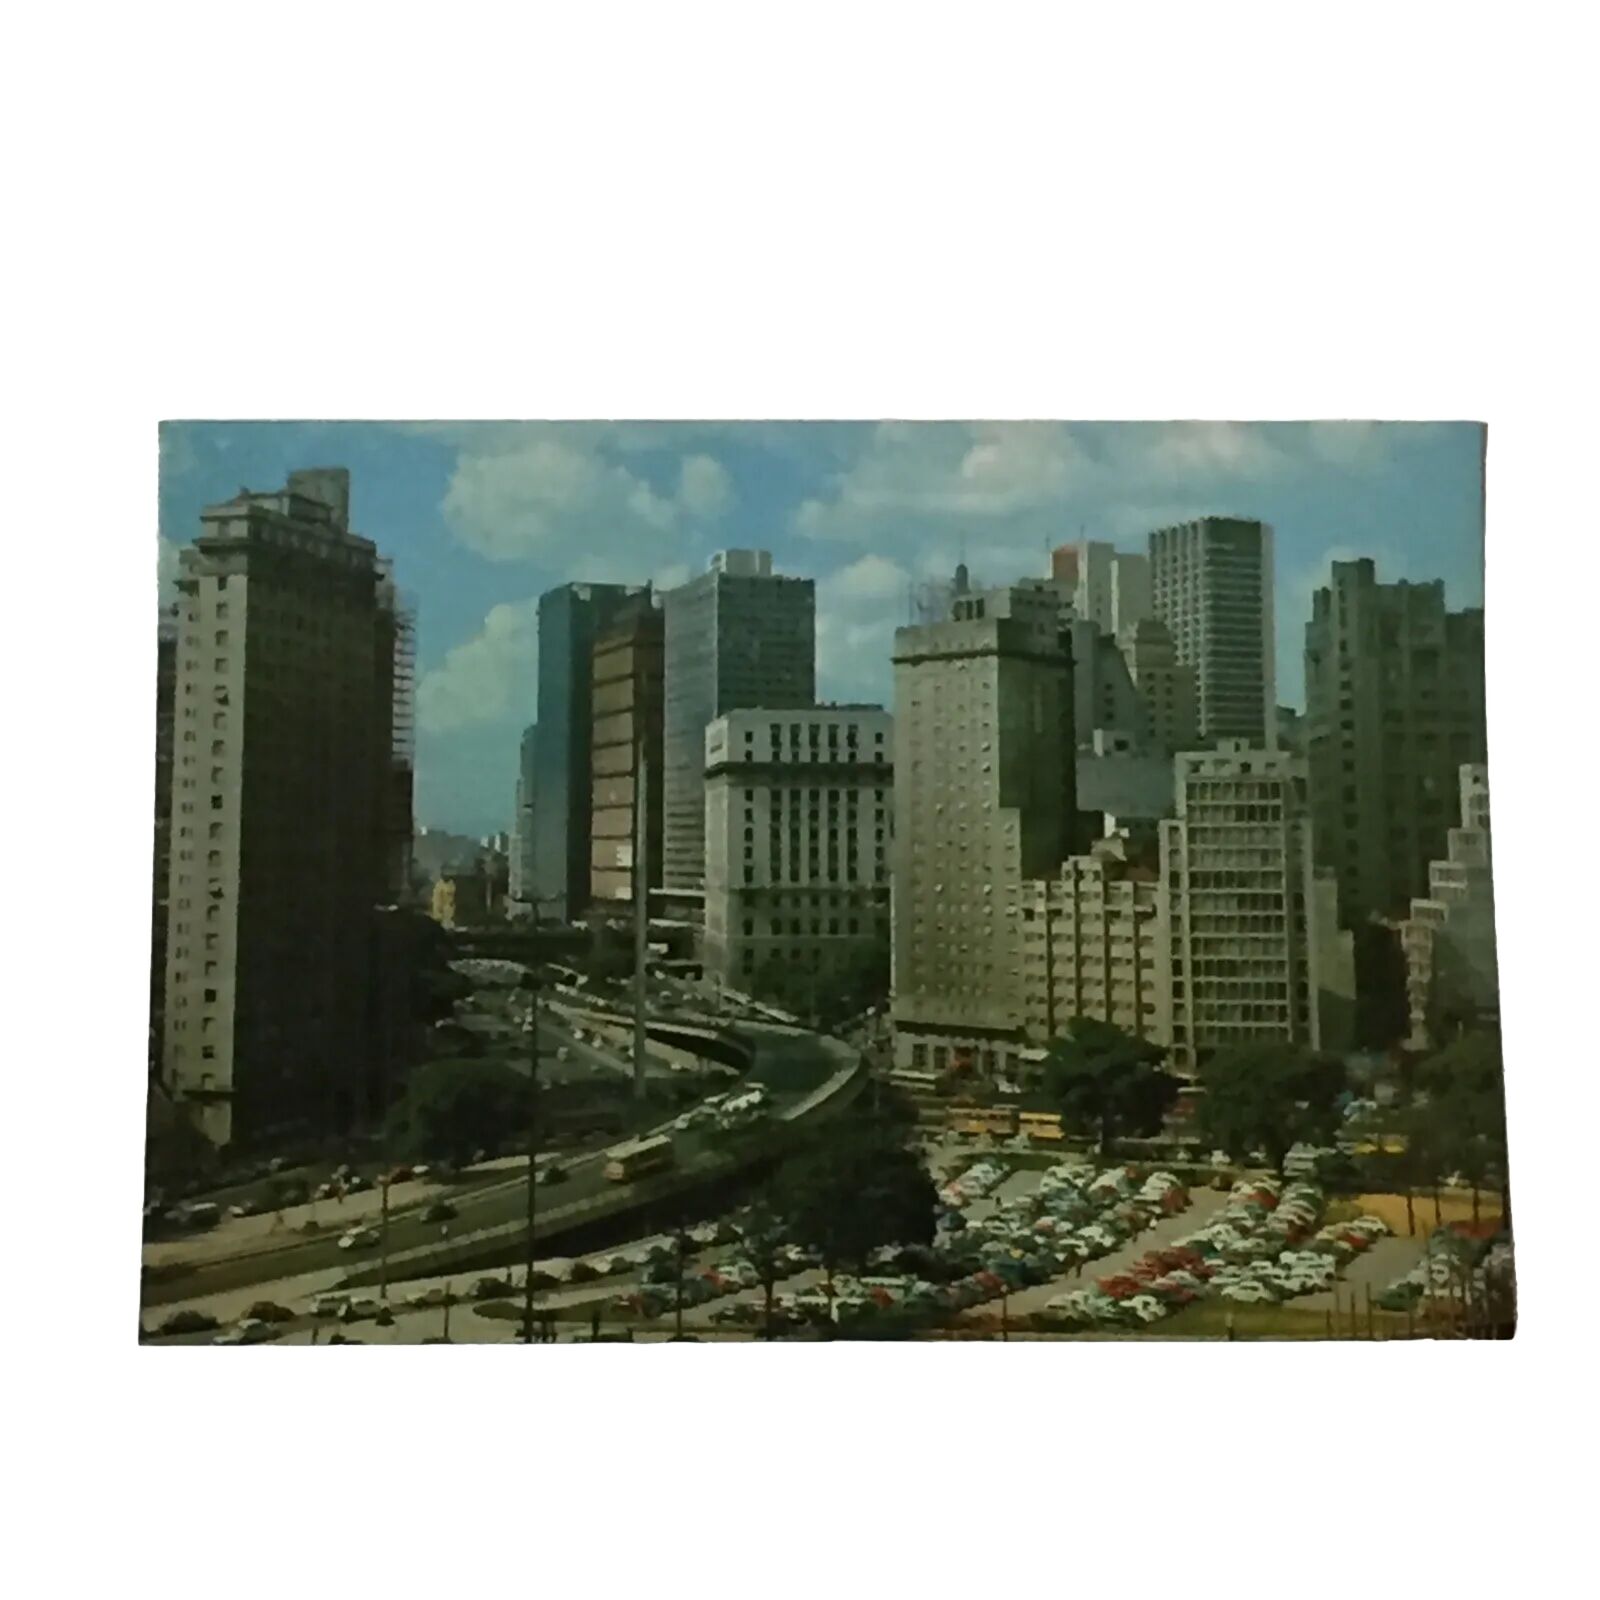 VTG Sao Paulo, Brazil Postcard “Bandeiras’ Square” Unposted Buildings Old Cars